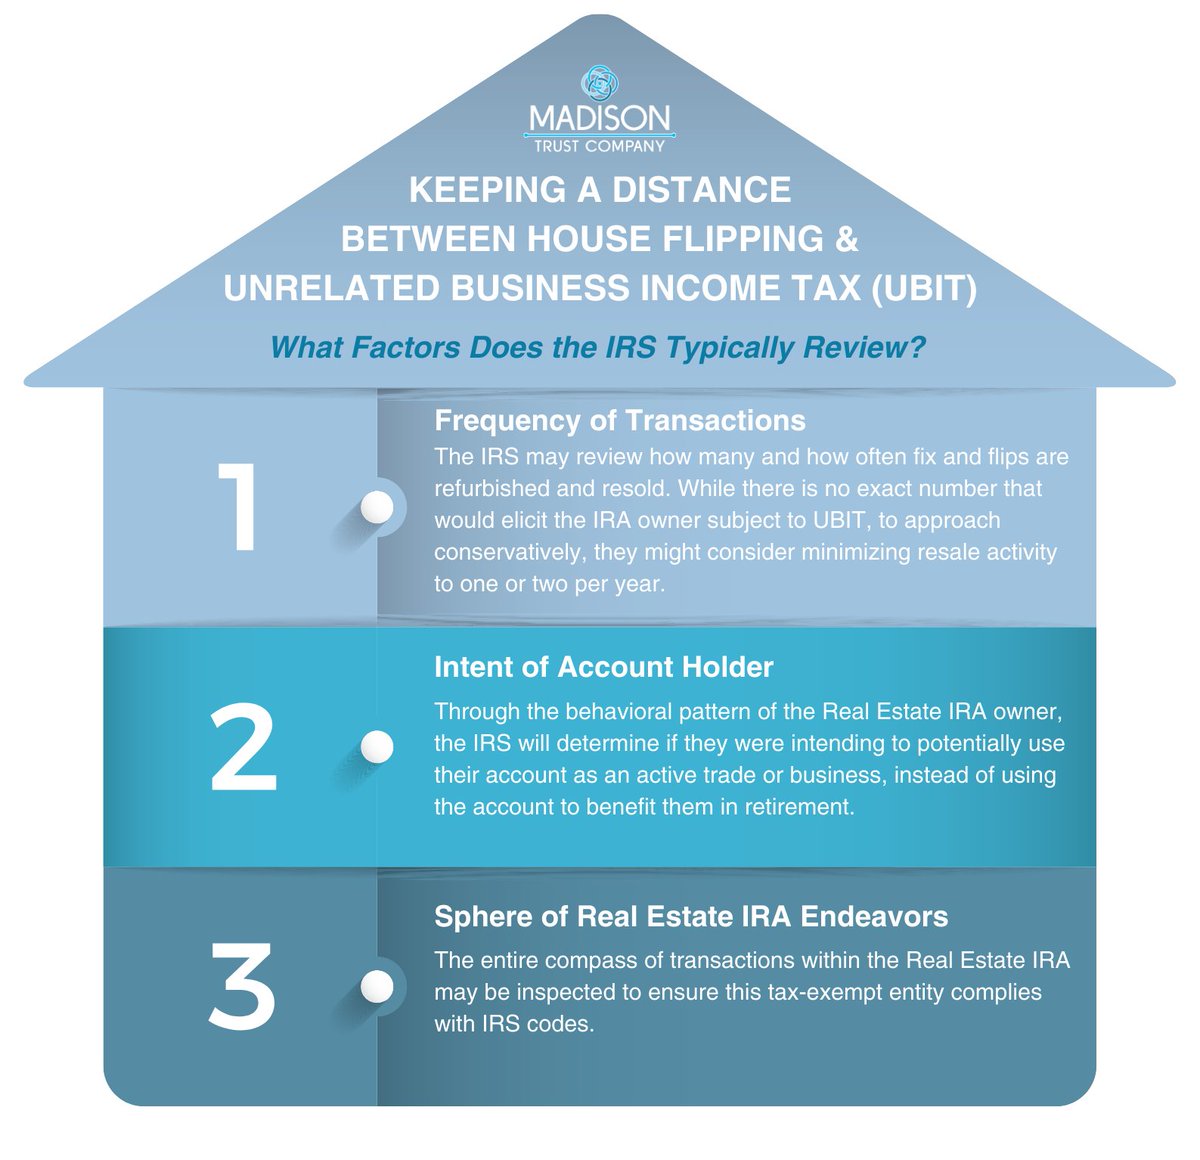 Master the art of house flipping while staying savvy with taxes! To help your #RealEstateIRA remain compliant, consider familiarizing yourself with #UBIT and other possible tax subjections. Read our recent blog to learn more: madisontrust.com/becoming-a-fix…